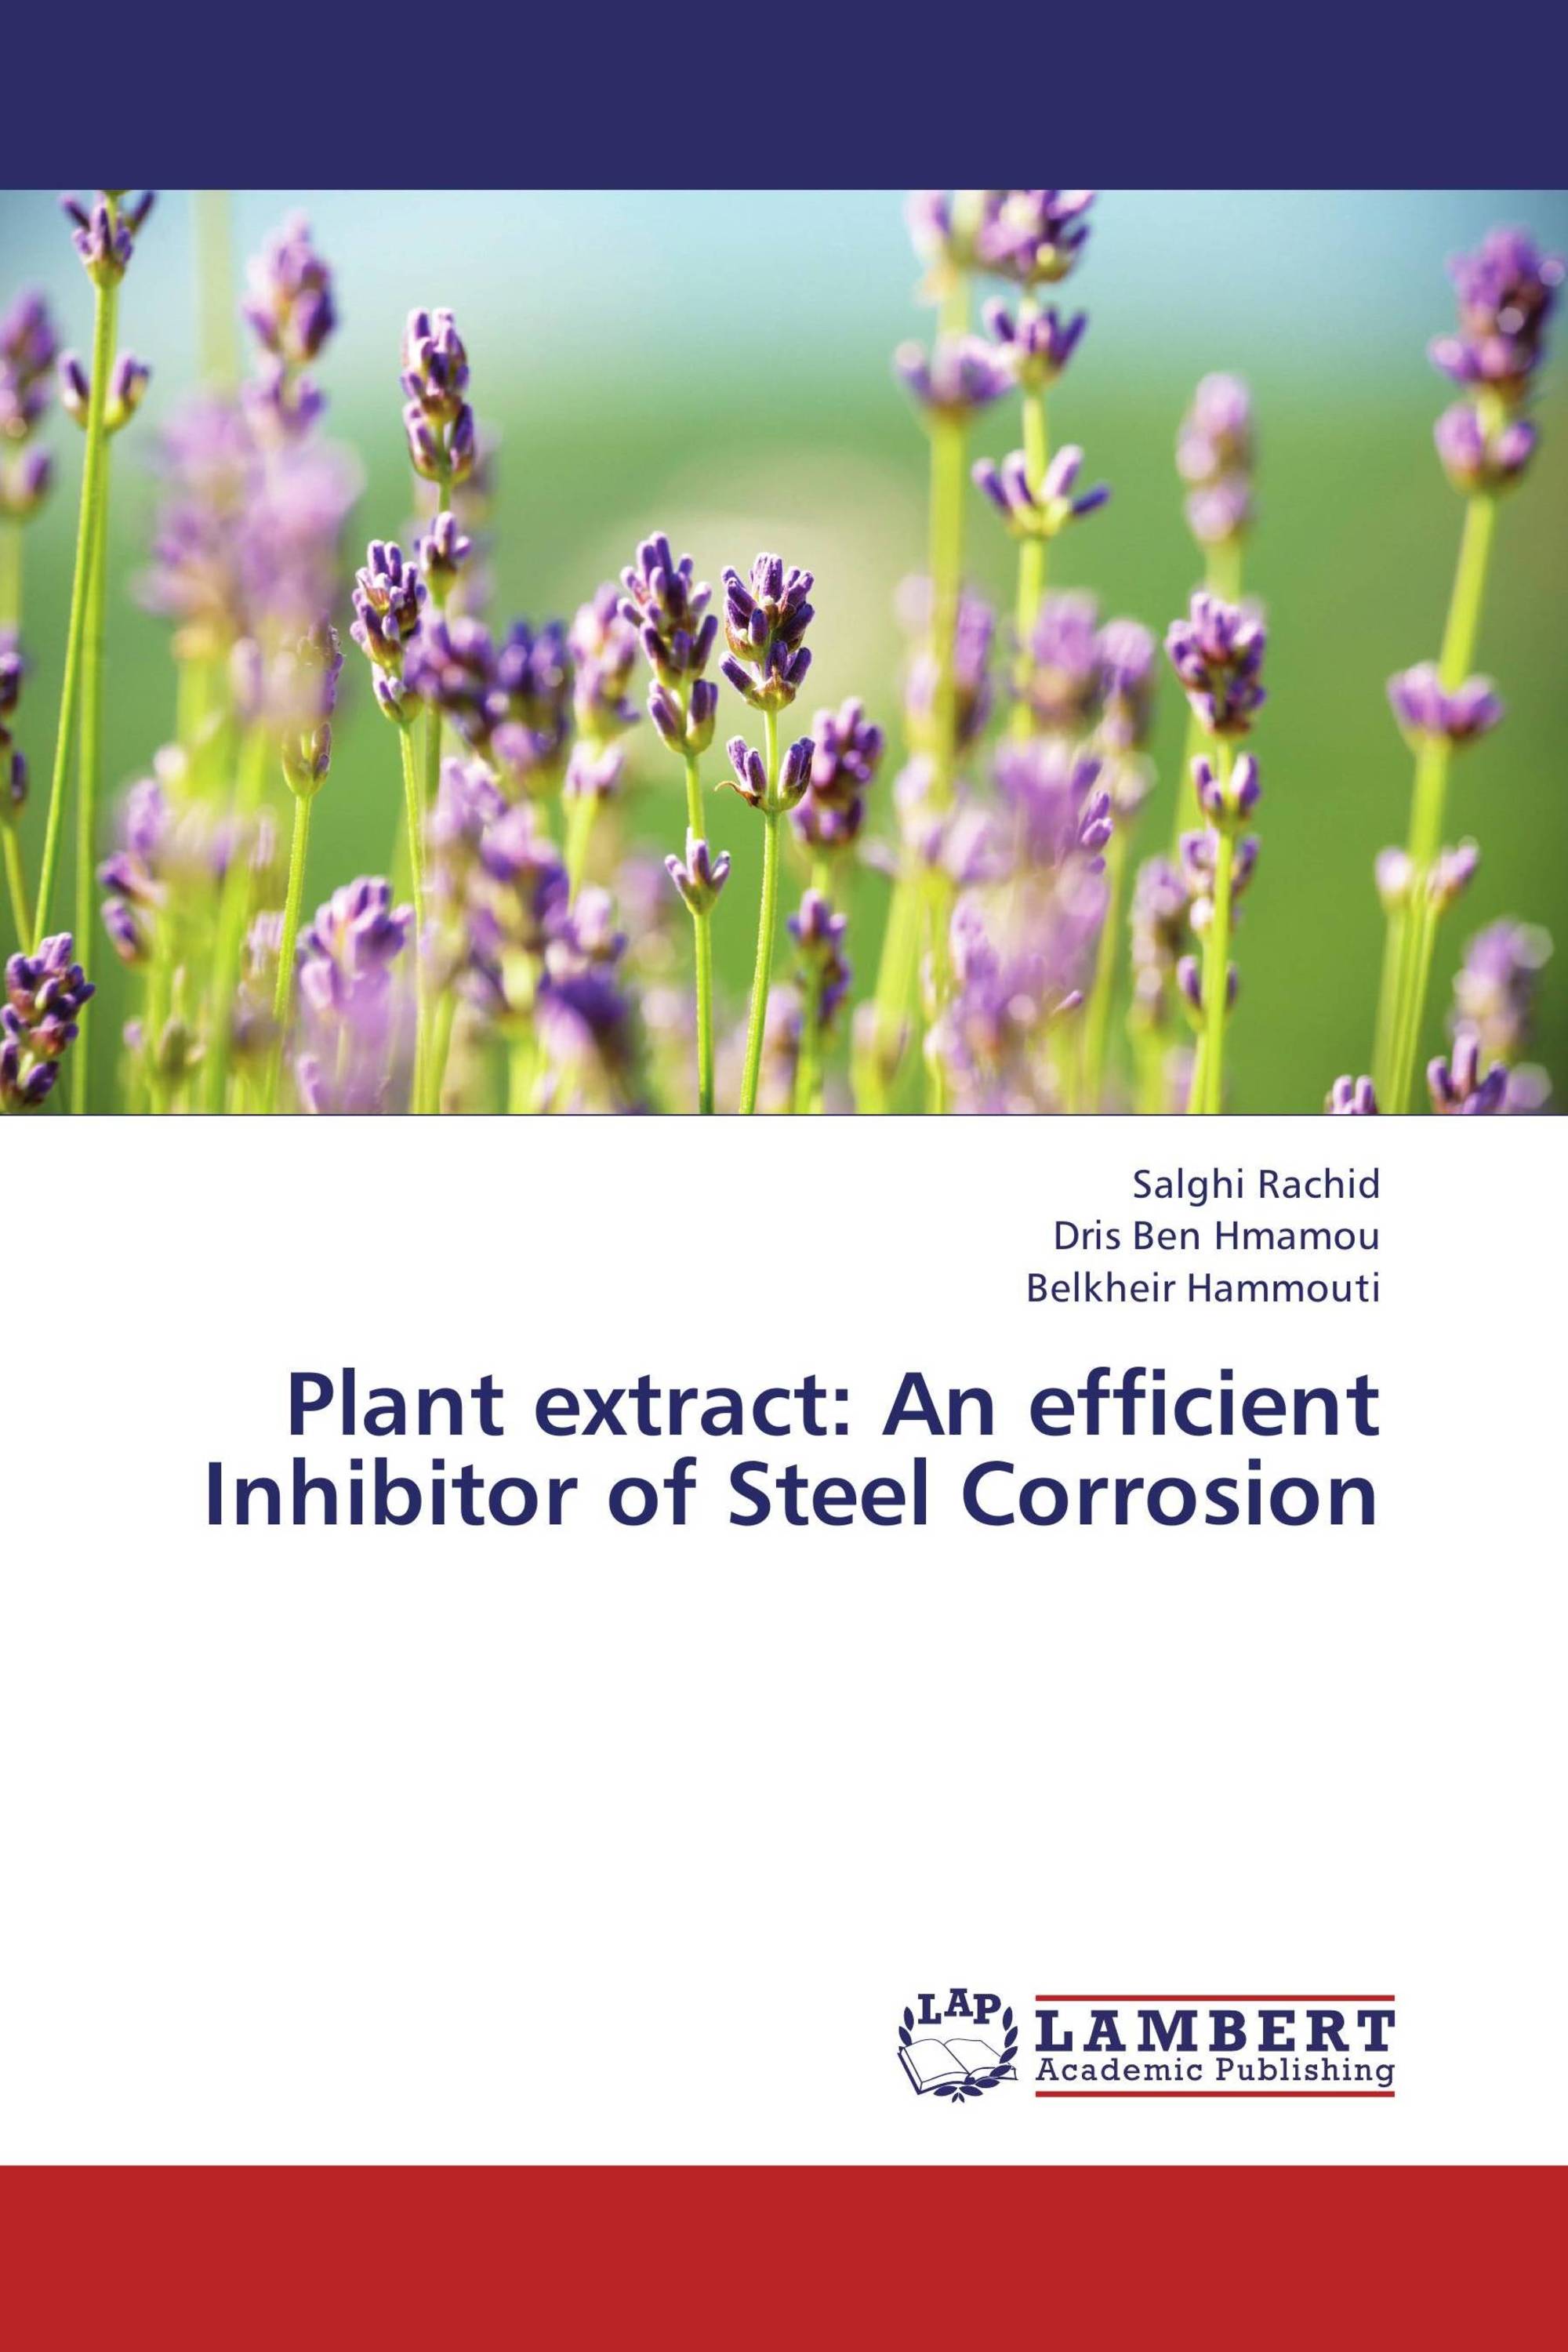 Plant extract: An efficient Inhibitor of Steel Corrosion